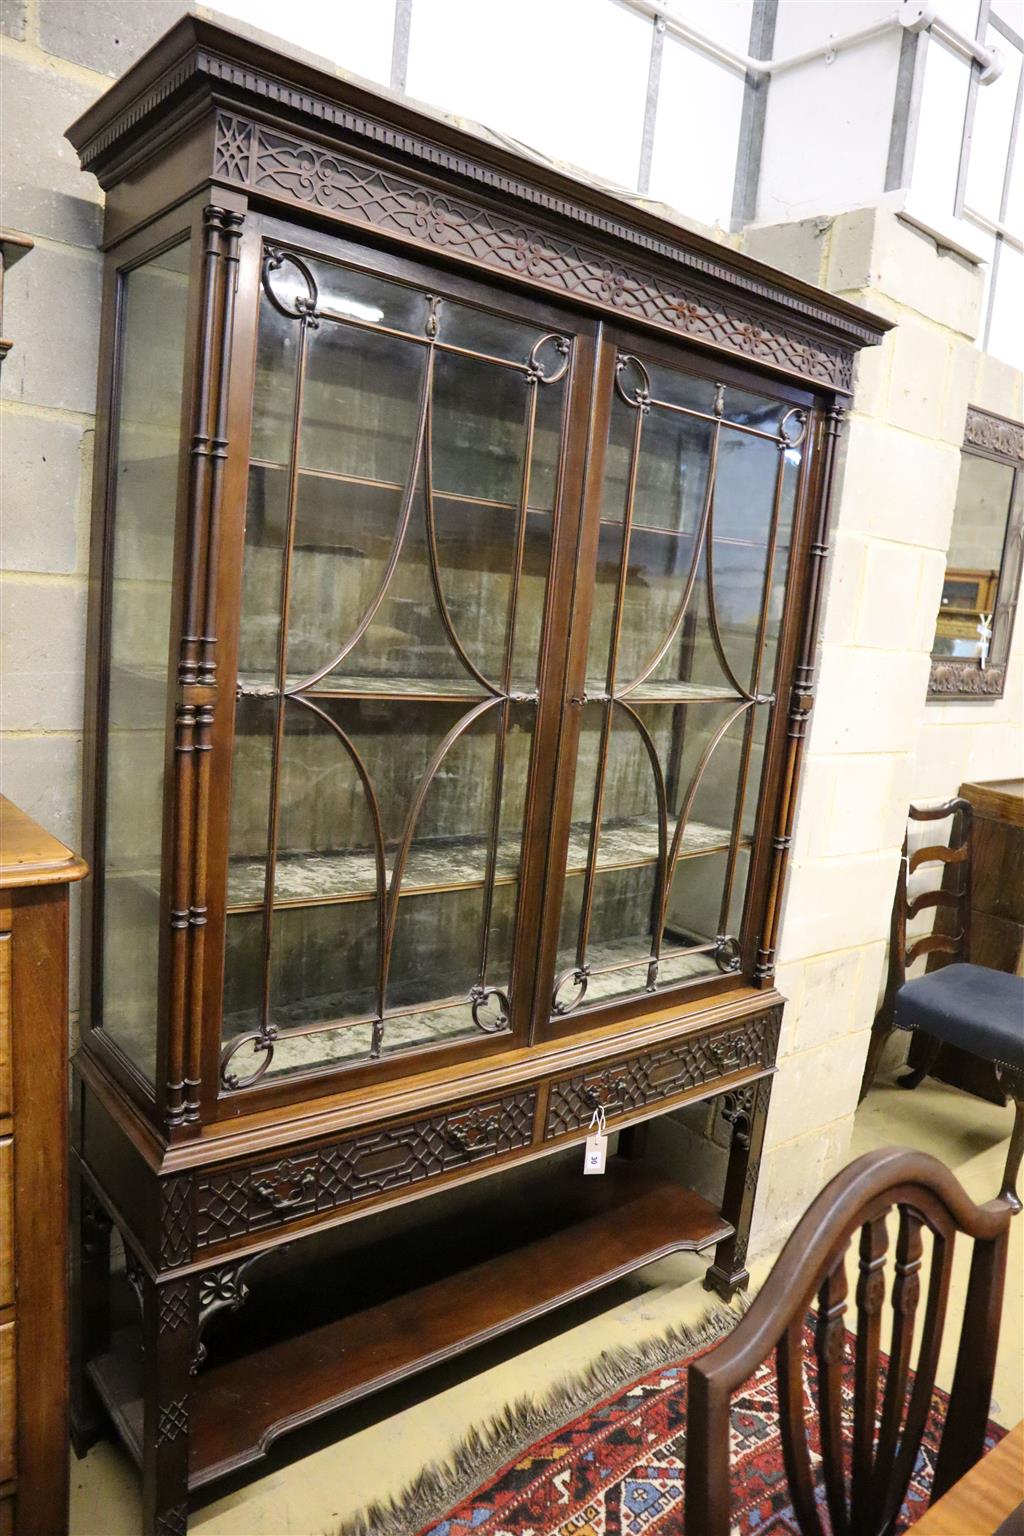 A Chippendale Revival mahogany display cabinet, width 126cm, depth 36cm, height 195cm